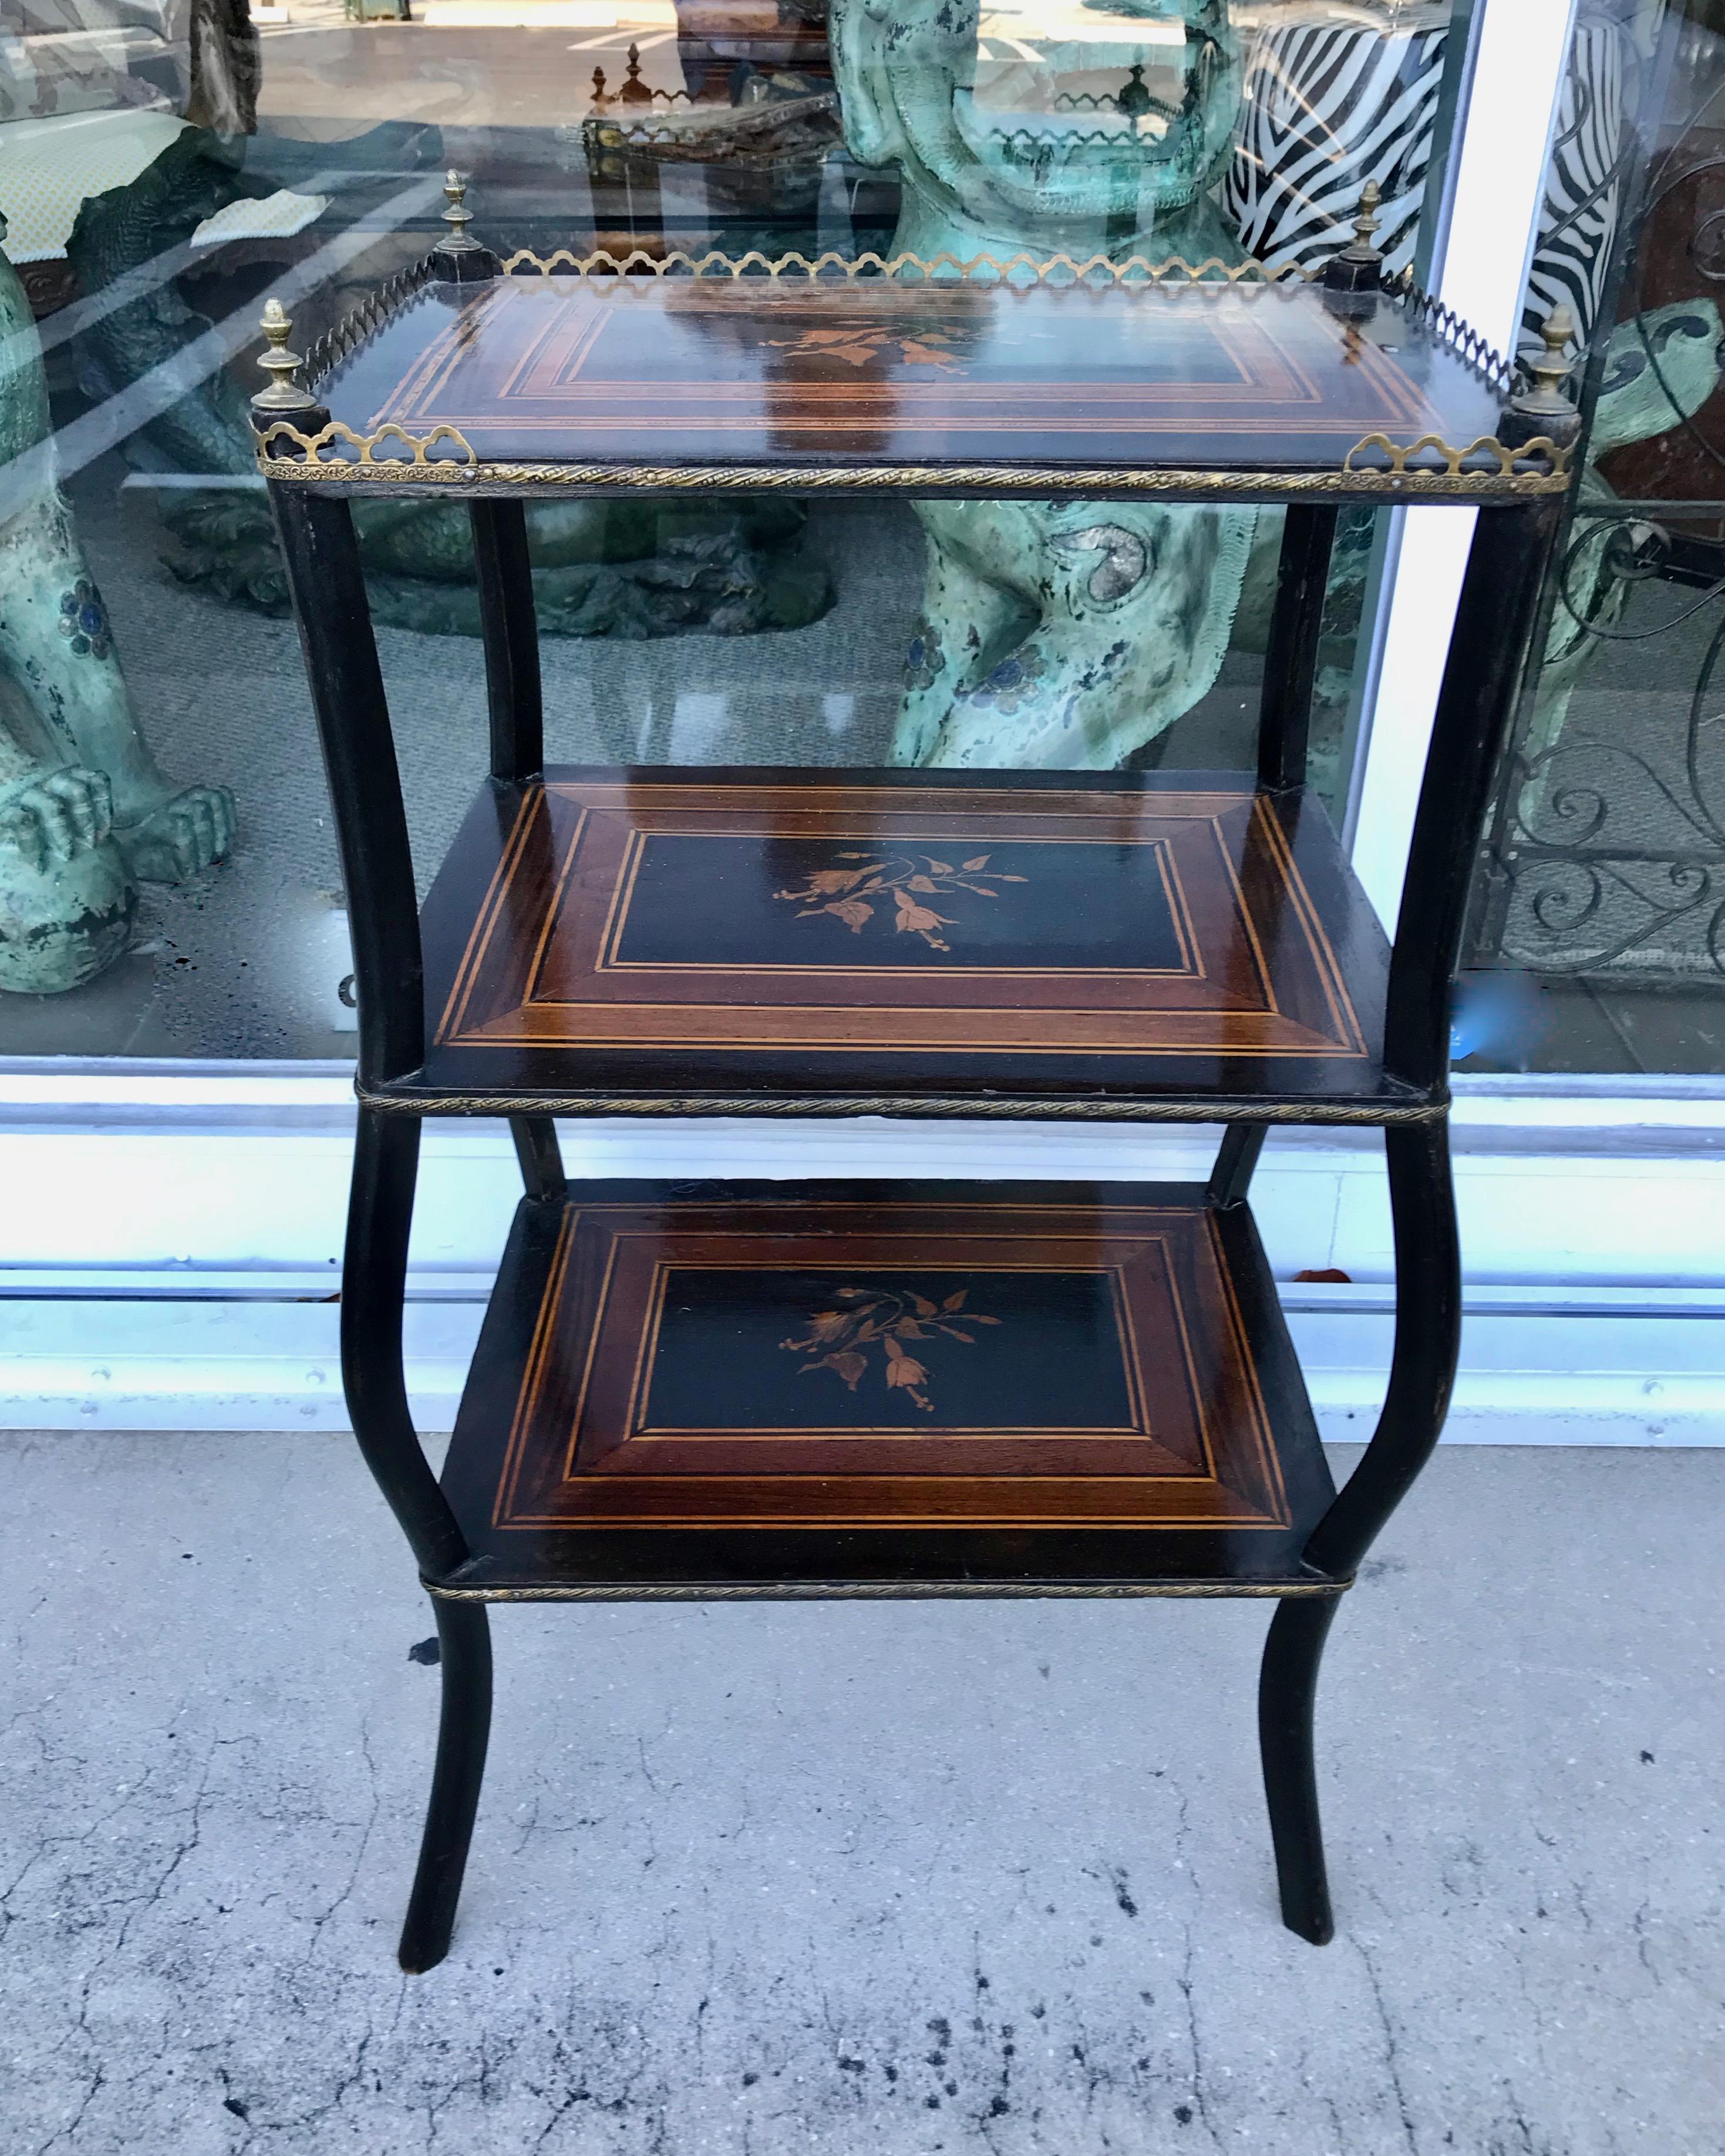 The stand is fashioned with 3 inlaid shelves, an upper brass gallery,
together with brass banding and finials. [ height measurement does
not include finials]
It is exquisitely inlaid with florals and ebonized accents.
Beautiful quality and